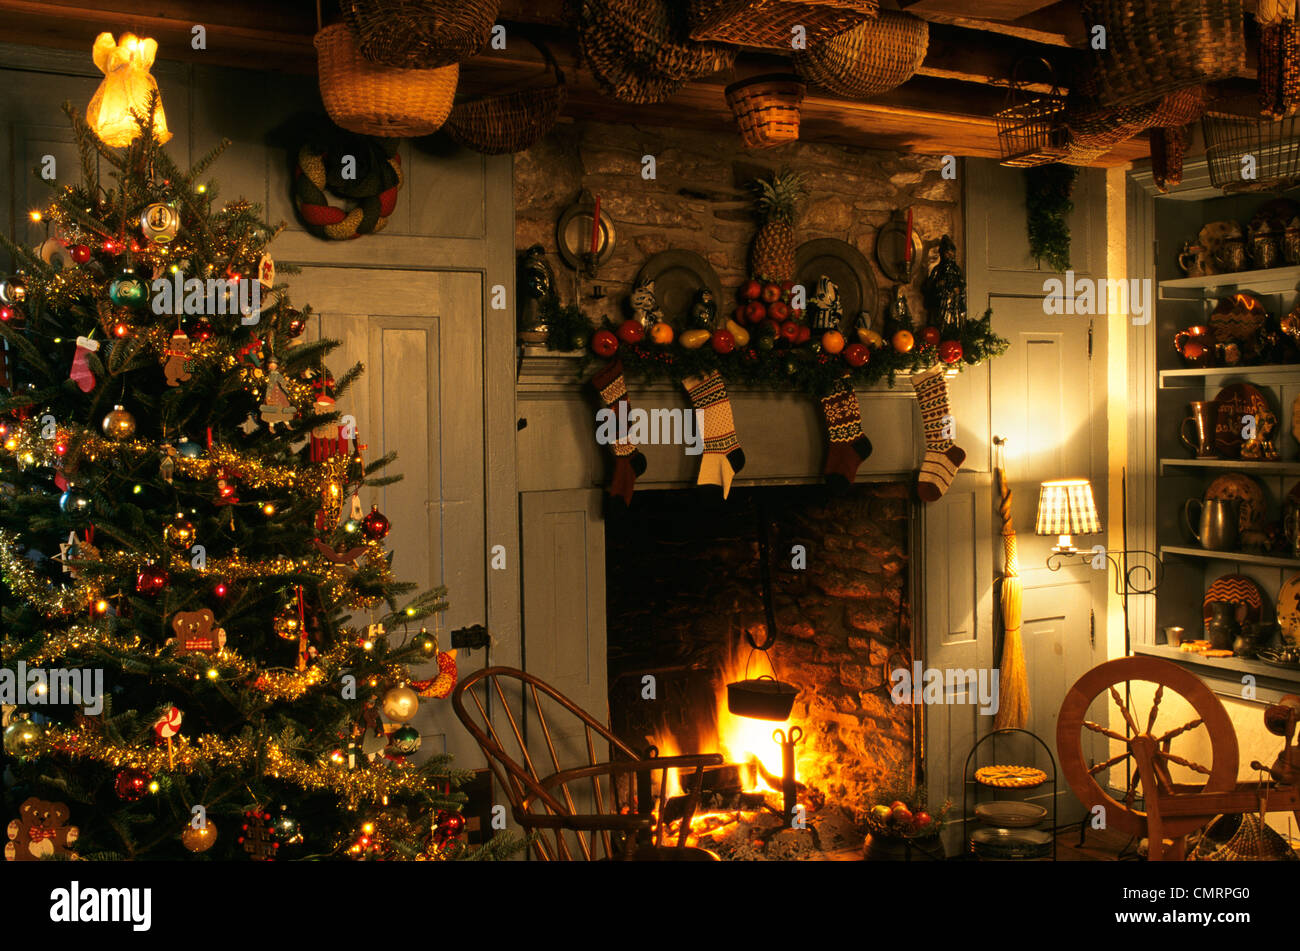 1990s COLONIAL INSPIRED CHRISTMAS TREE AND FIREPLACE Stock Photo ...